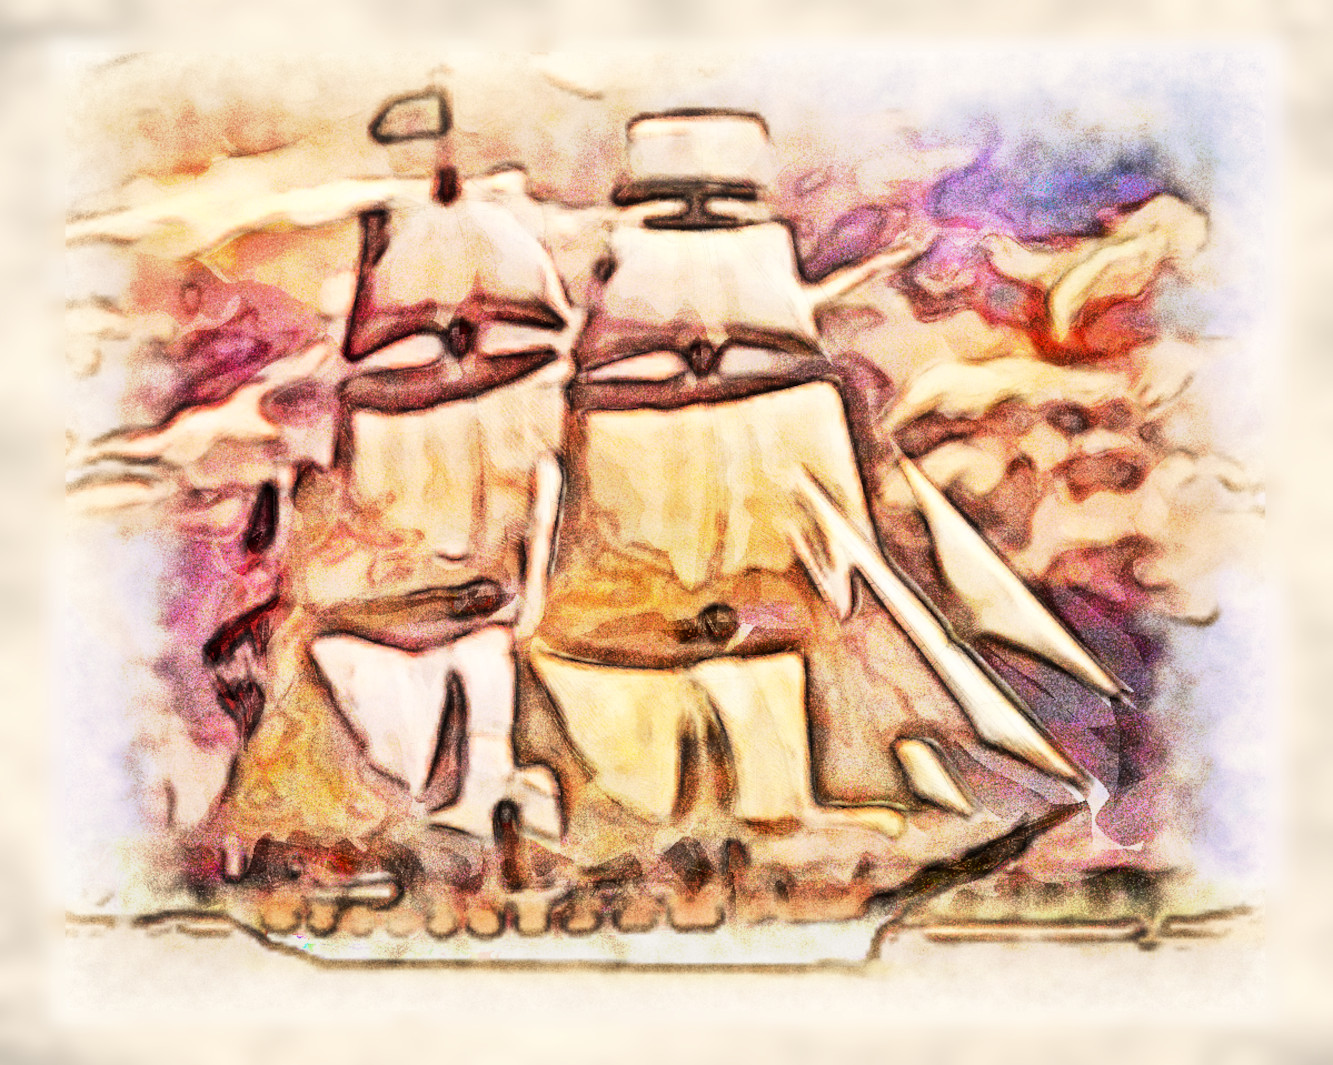 2023-10-03 10-50-34 sailing-ship-659758 with a Watercolor Pastels Effect 2023 (10.0,75.0,32.0,55.0,15.0,8.0,75.0,True,0).jpg